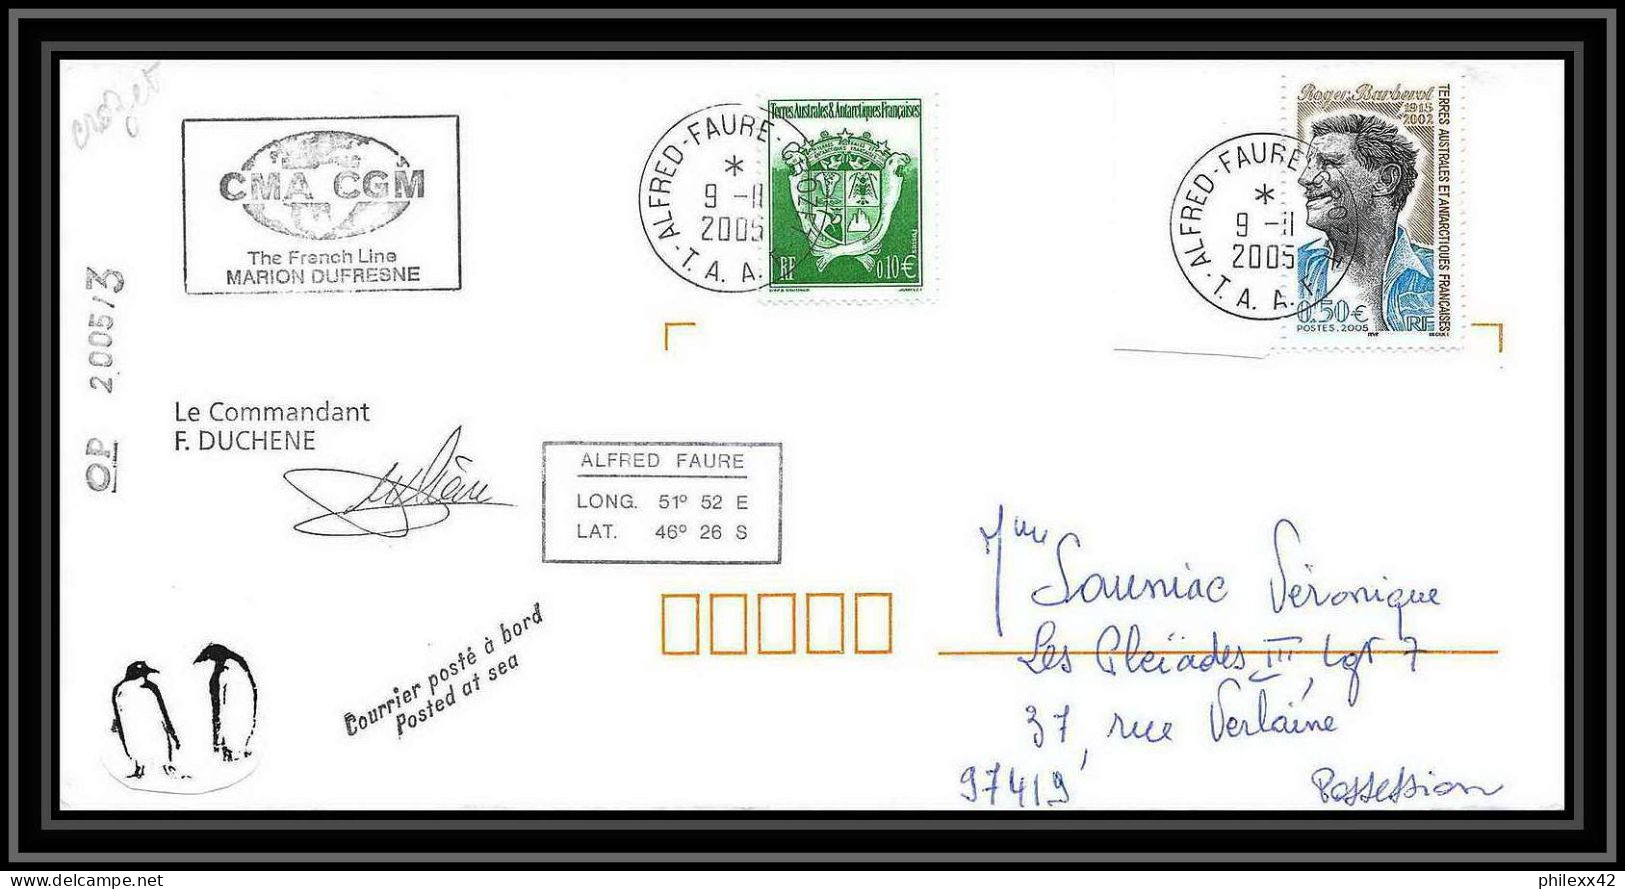 2534 ANTARCTIC Terres Australes TAAF Lettre Cover Dufresne 2 Signé Signed Op 2005/3 Crozet 9/11/2005 N°406 - Antarctic Expeditions